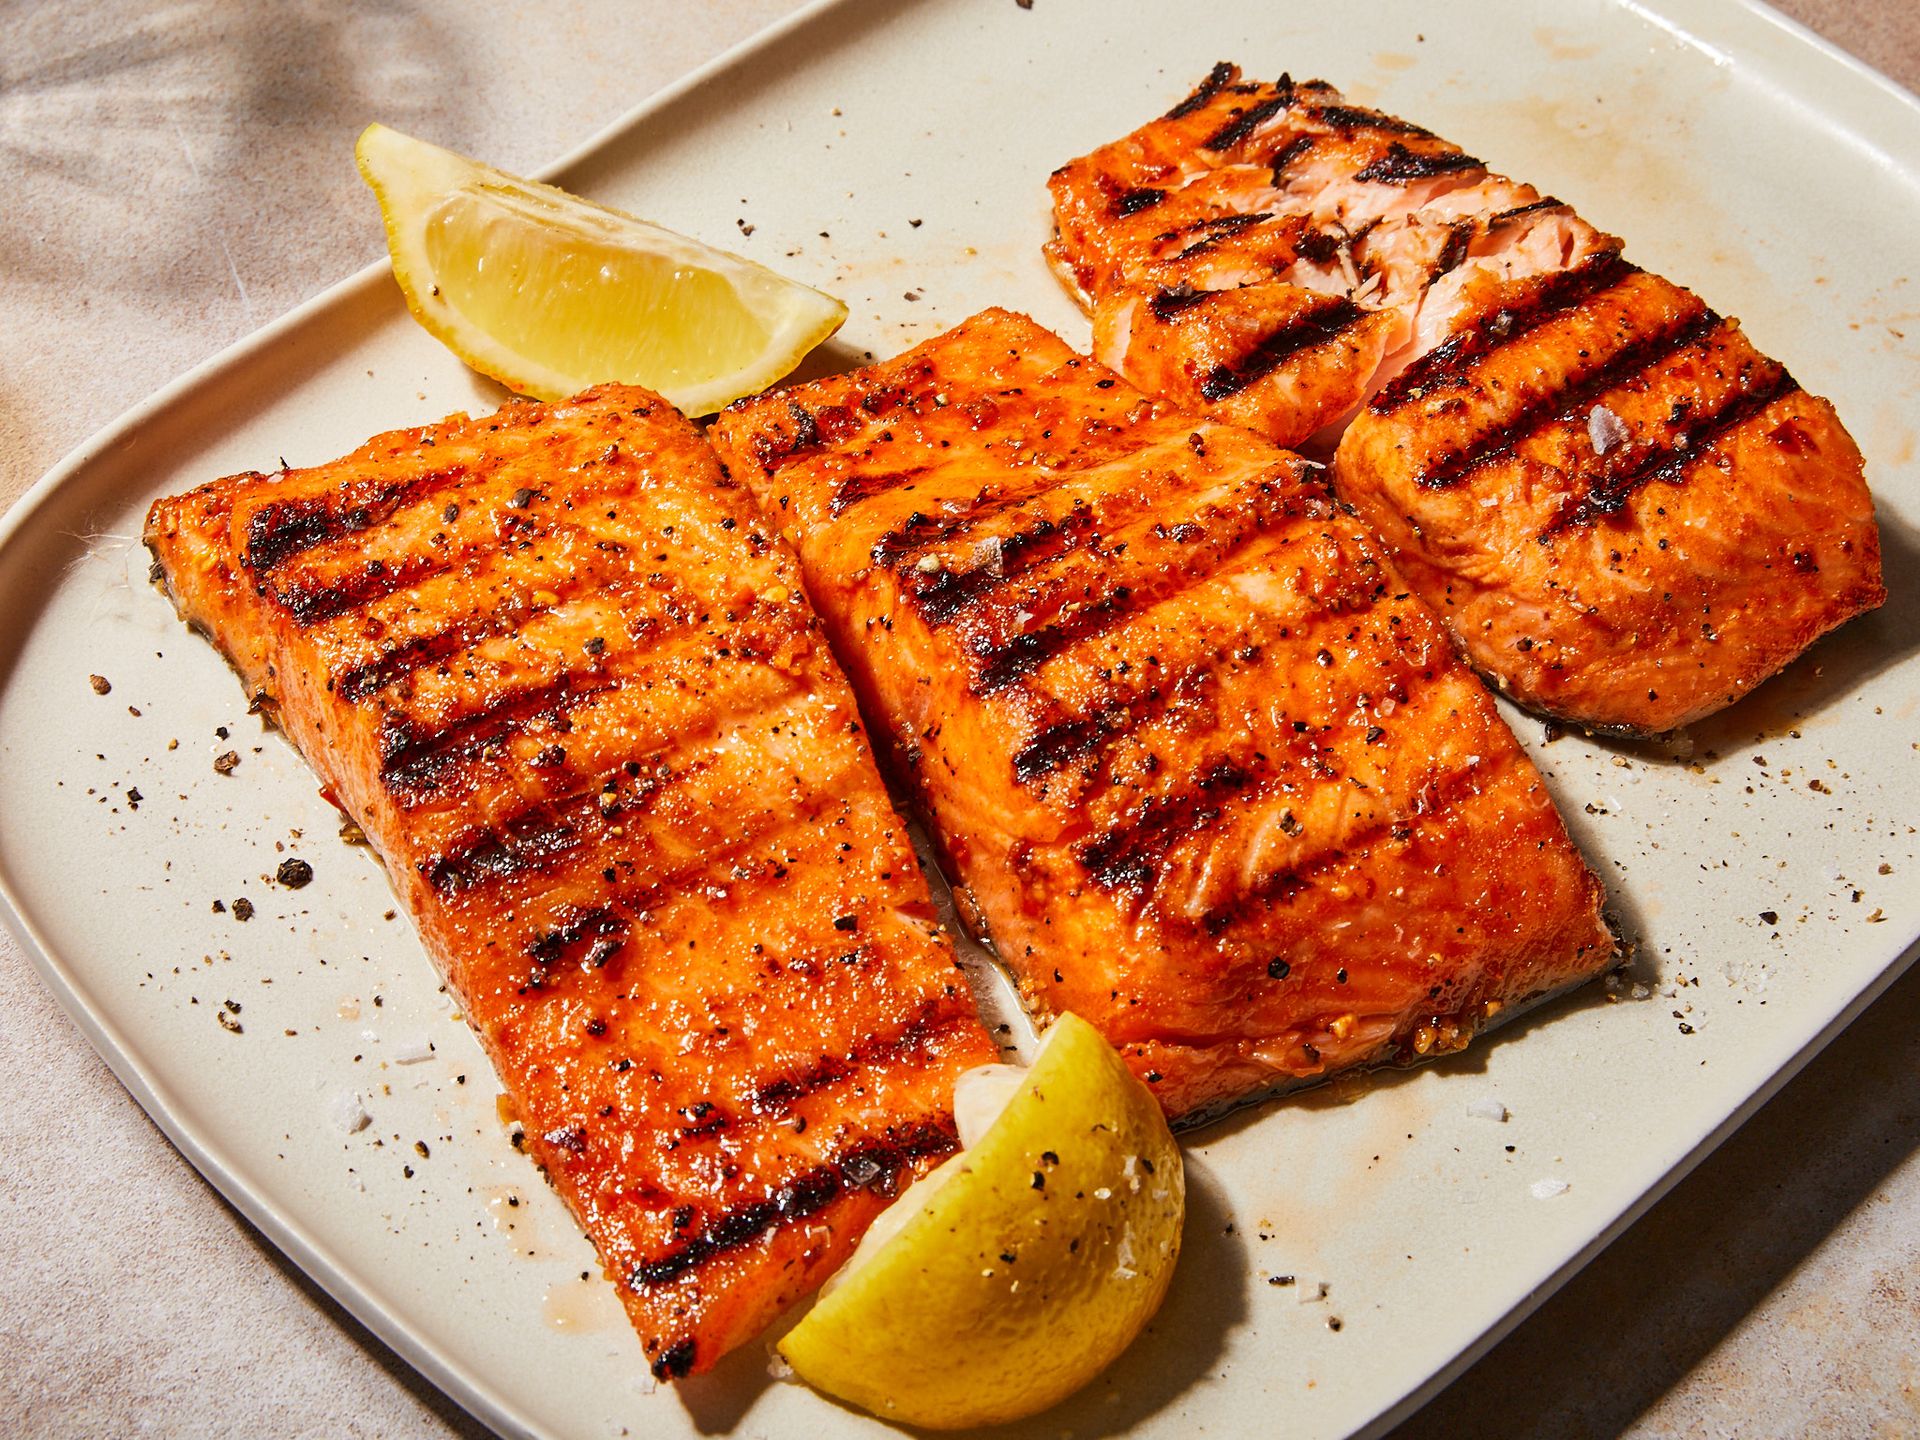 Perfectly grilled salmon fillet